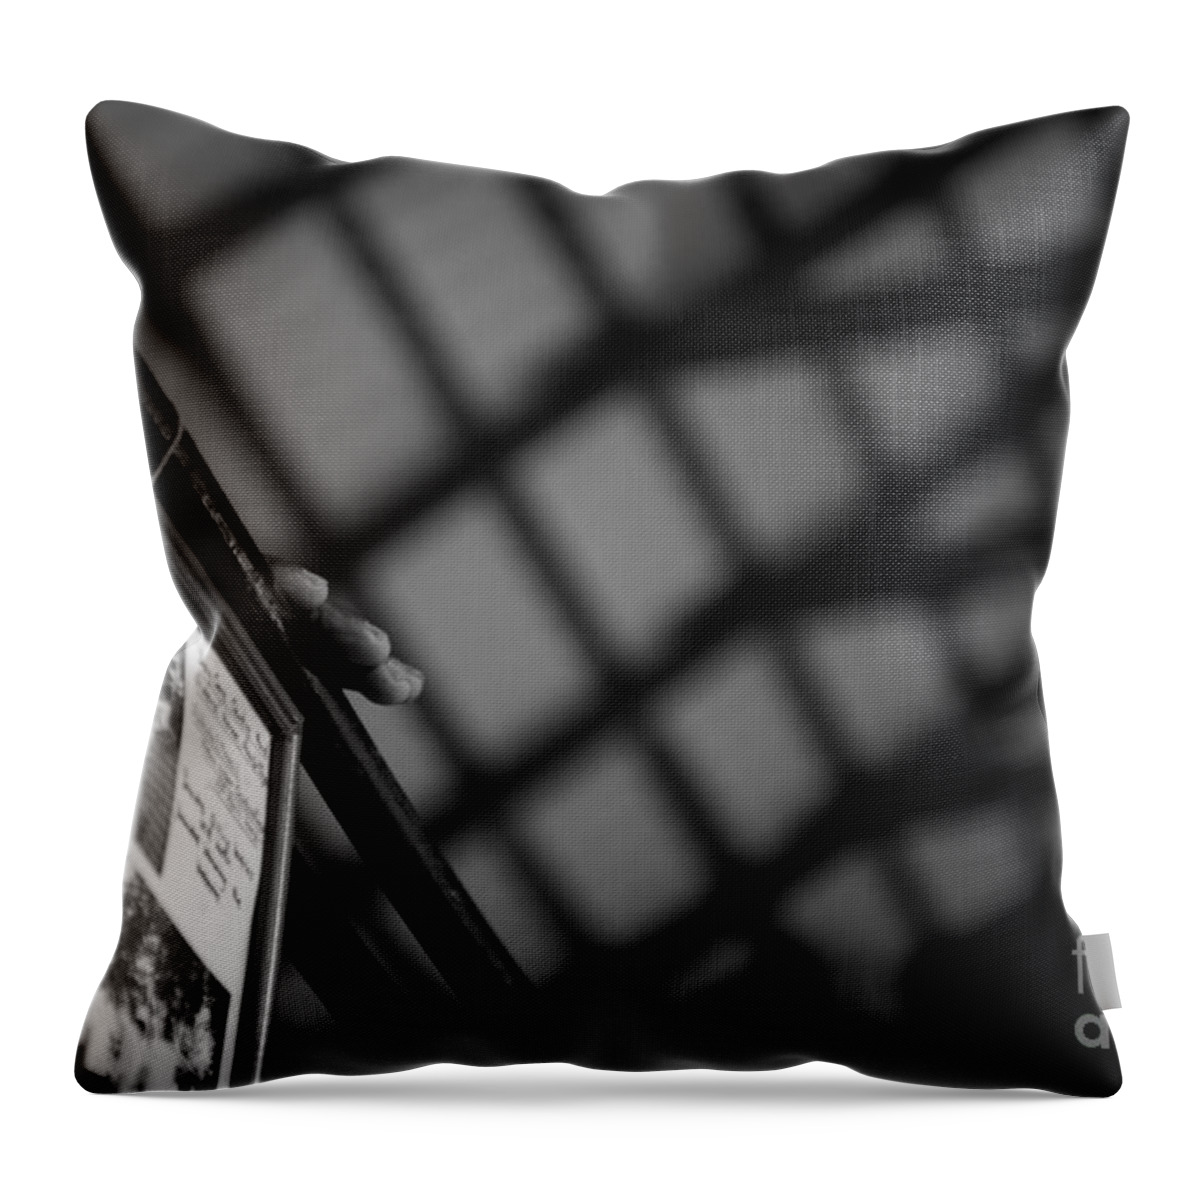 Old Man's Hand Throw Pillow featuring the photograph Courage by Venura Herath